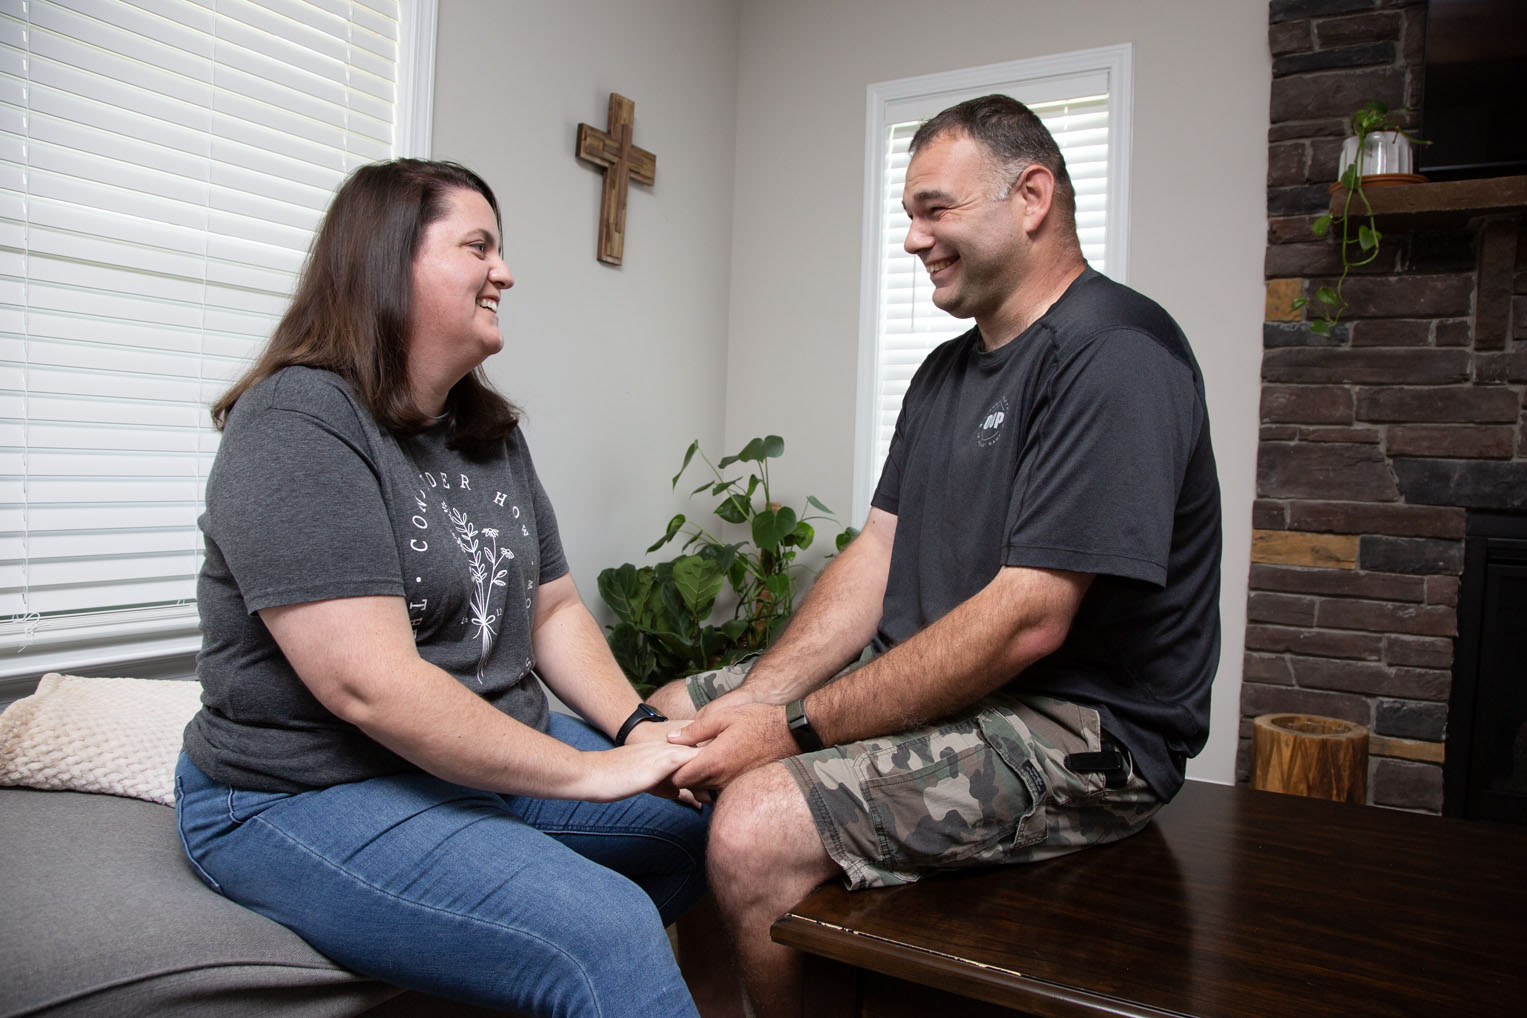 It was many years after Alaska that Petey Beam received Jesus Christ as his Lord and Savior. His and Kyra's marriage has experienced renewed life since then.